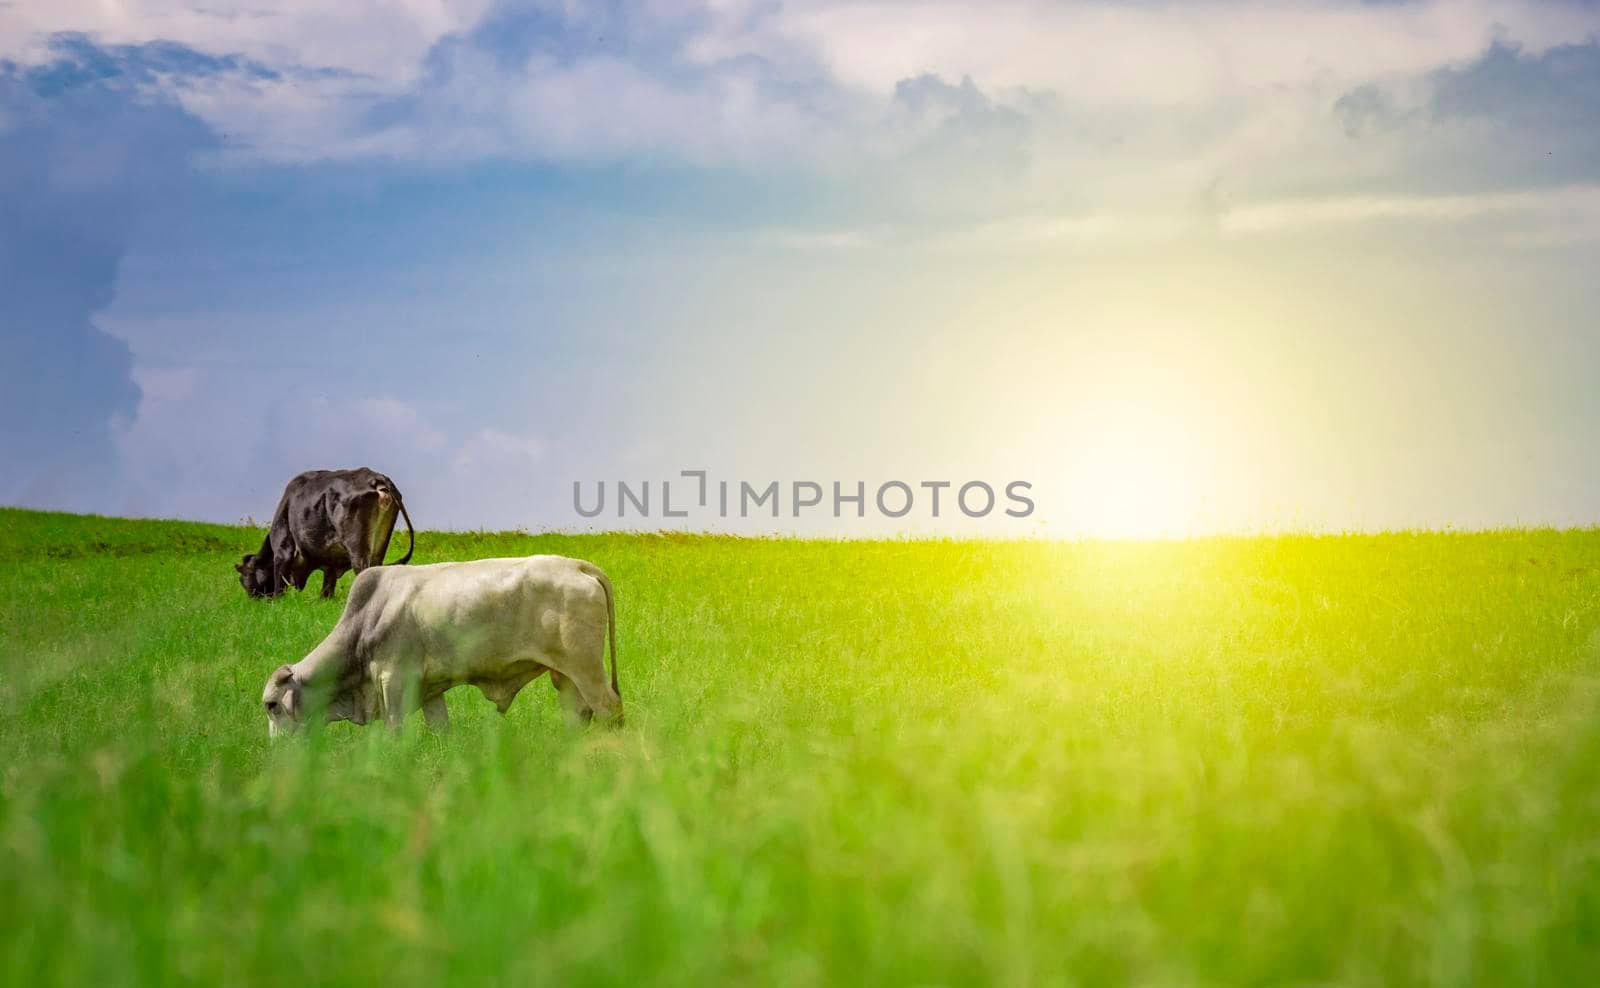 Two cows in the field eating grass, Several cows in a green field with blue sky and copy space, A green field with two cows eating grass and beautiful blue sky